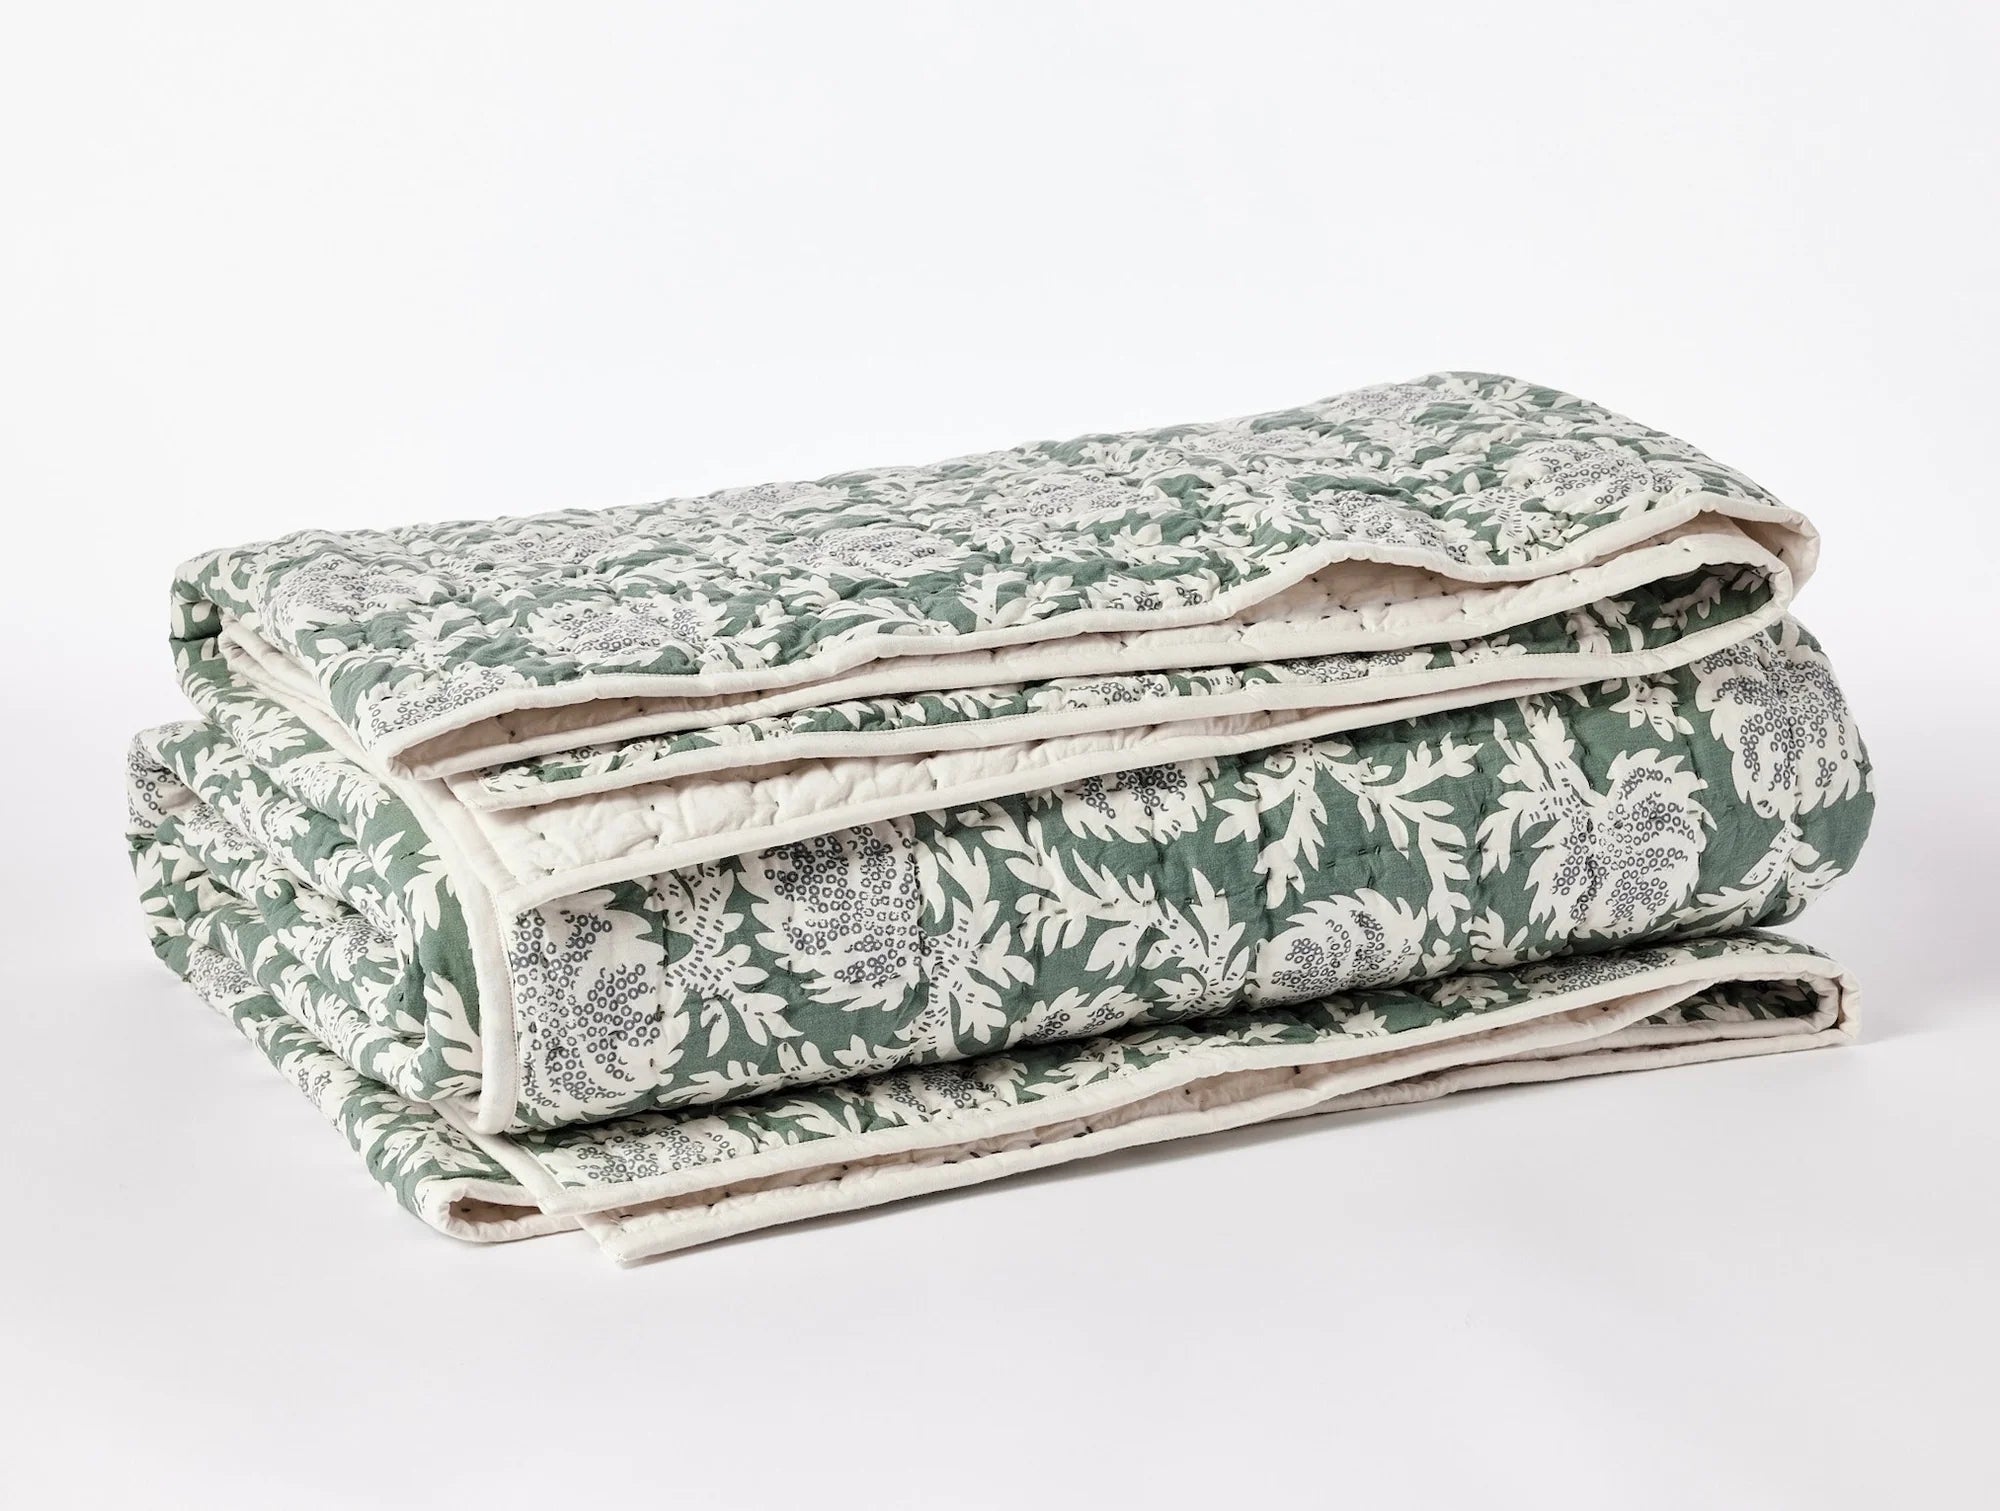 A Coyuchi Inc Robles Handstitched Org Quilt featuring a green and white floral pattern on a neutral background, perfect for a cozy bungalow in Scottsdale, Arizona. The texture appears soft and layered, highlighting the detailed stitching.